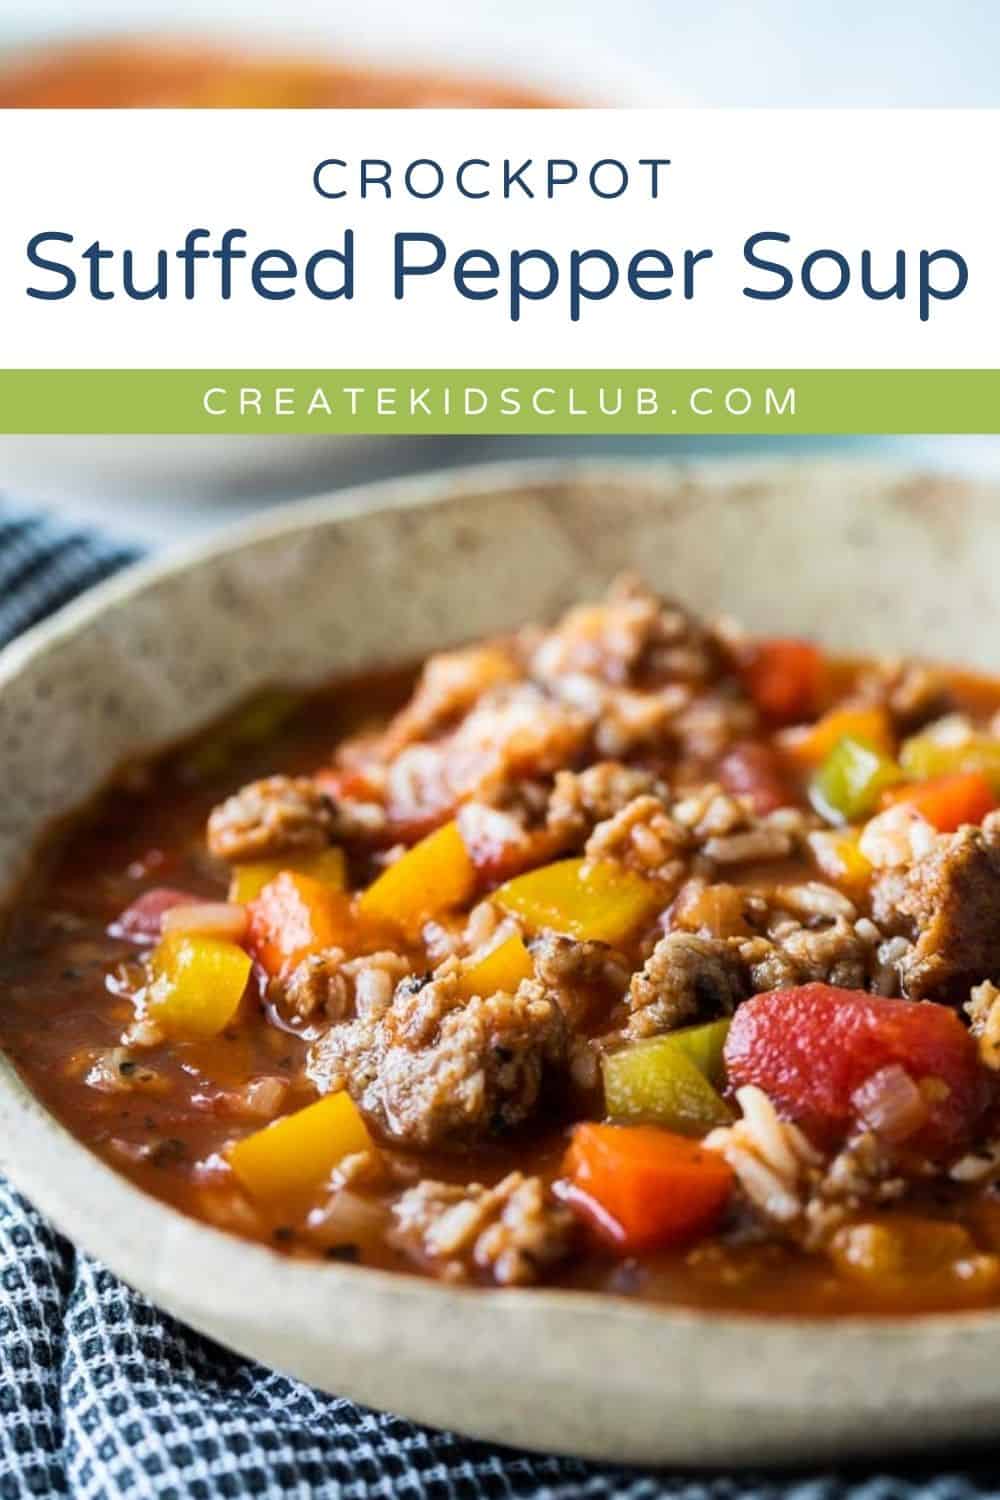 Pin of stuffed pepper soup in bowl